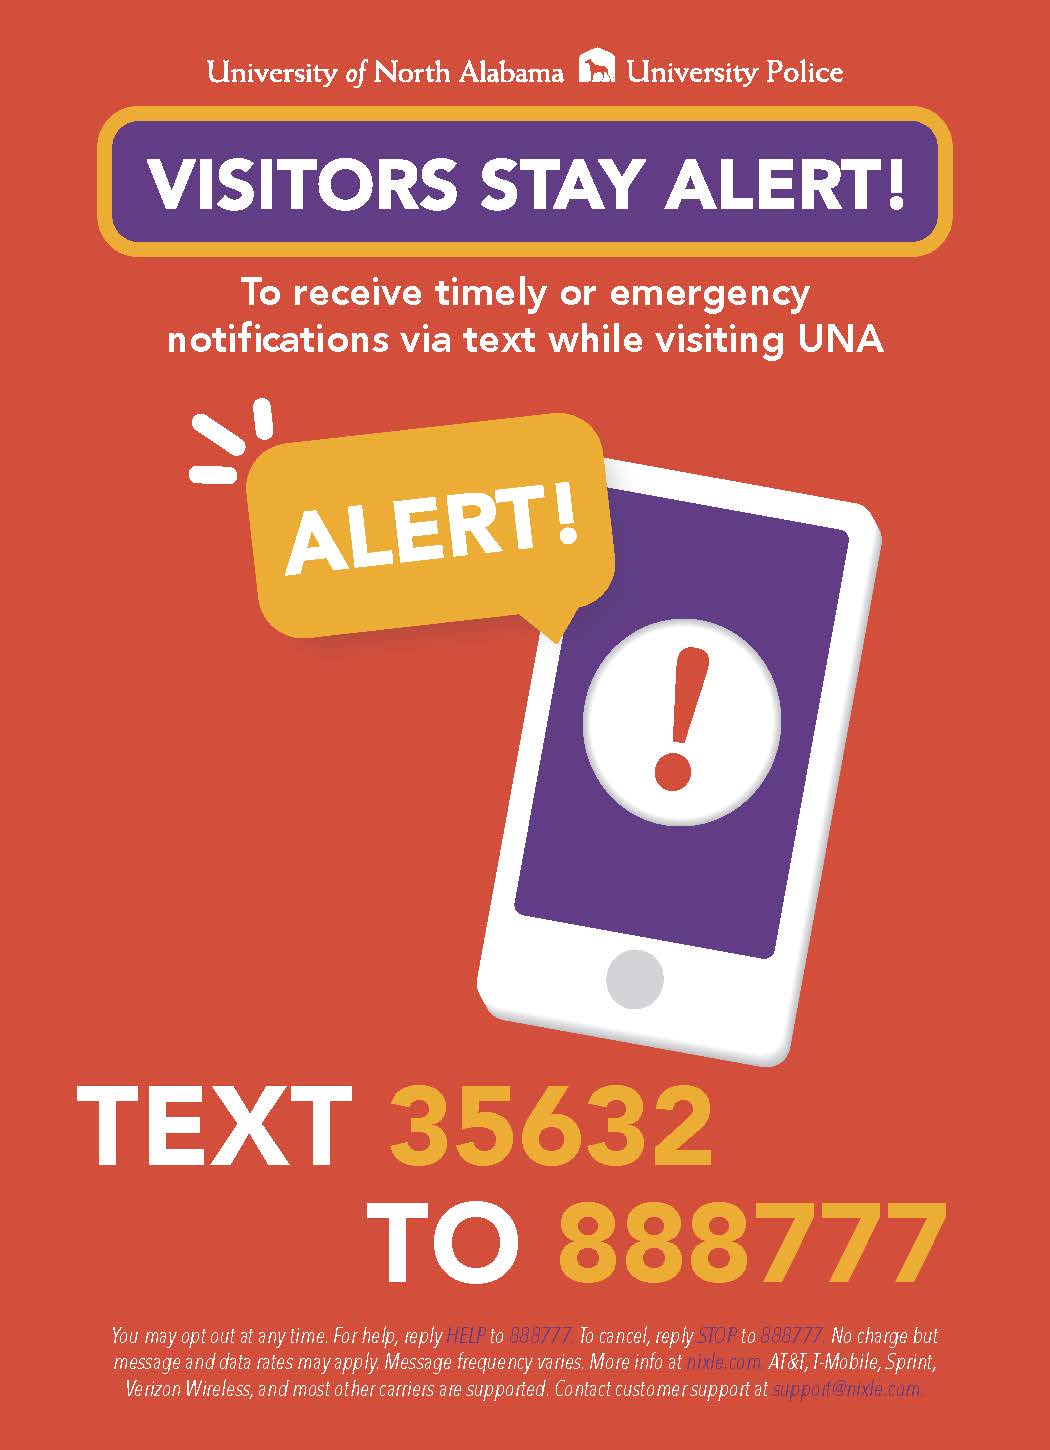 For visitors, parents or community members text 35632 to 888777.